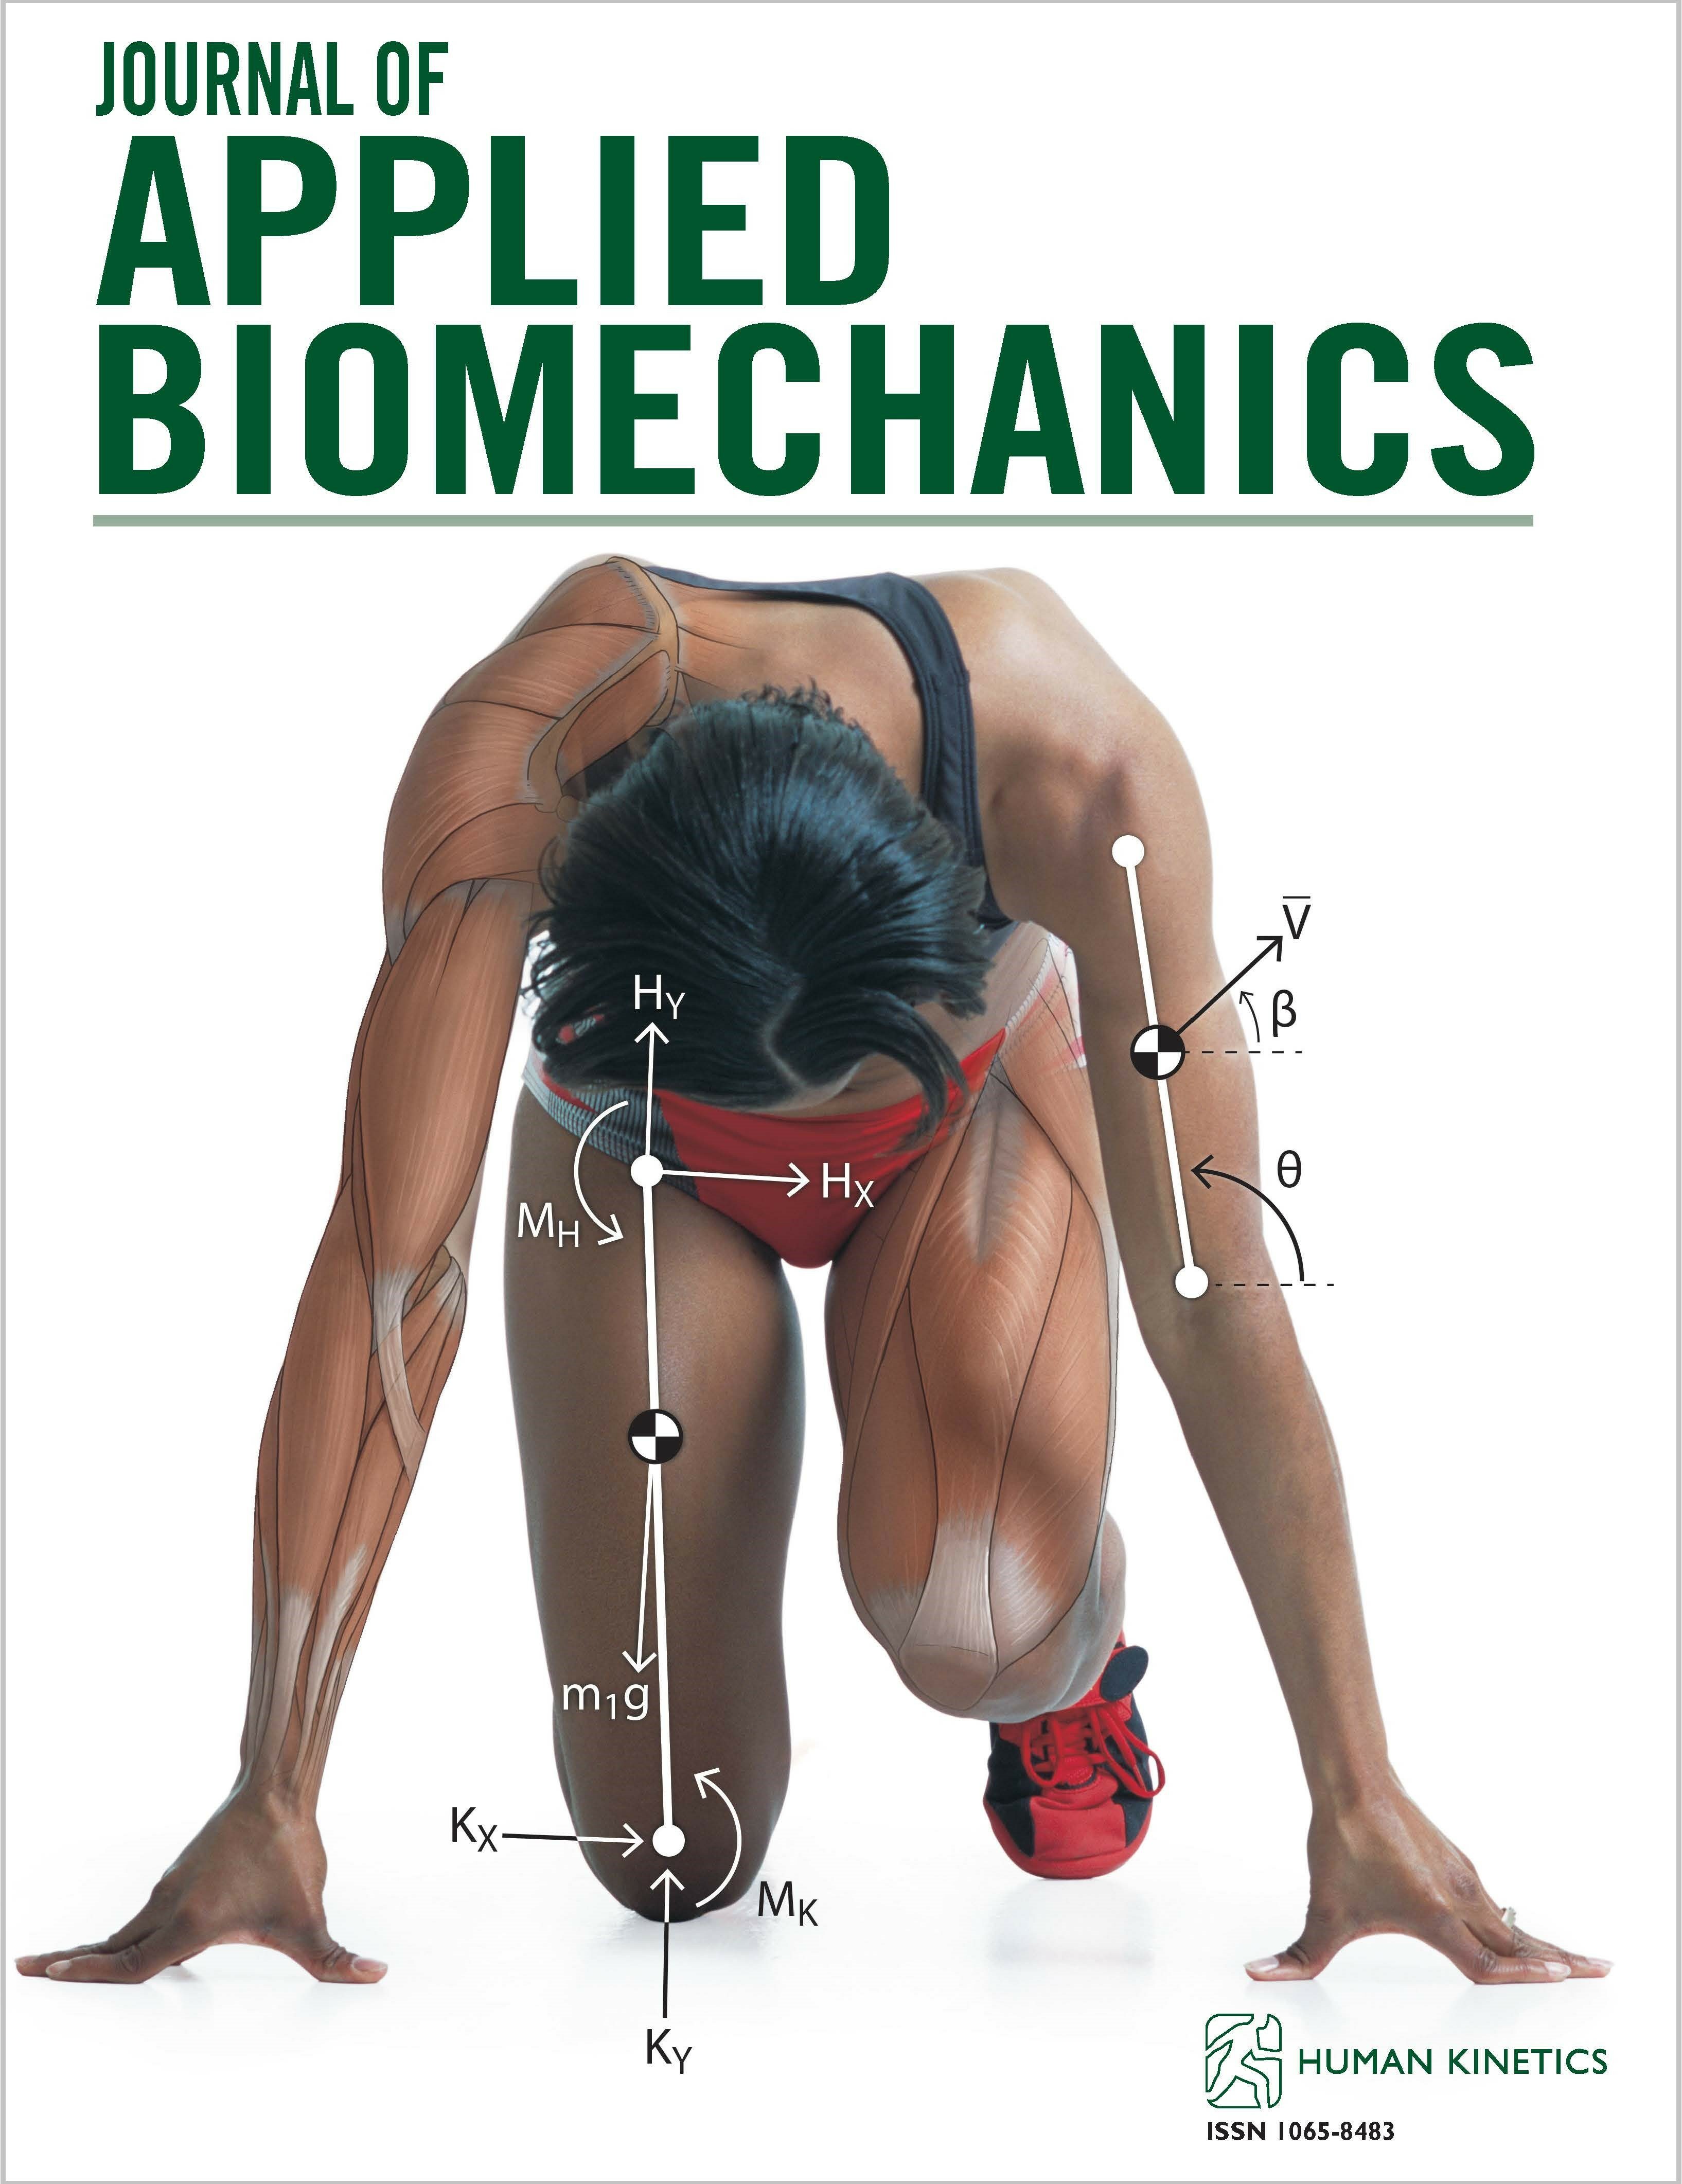 In Silico Biomarkers of Motor Function to Inform Musculoskeletal Rehabilitation and Orthopedic Treatment